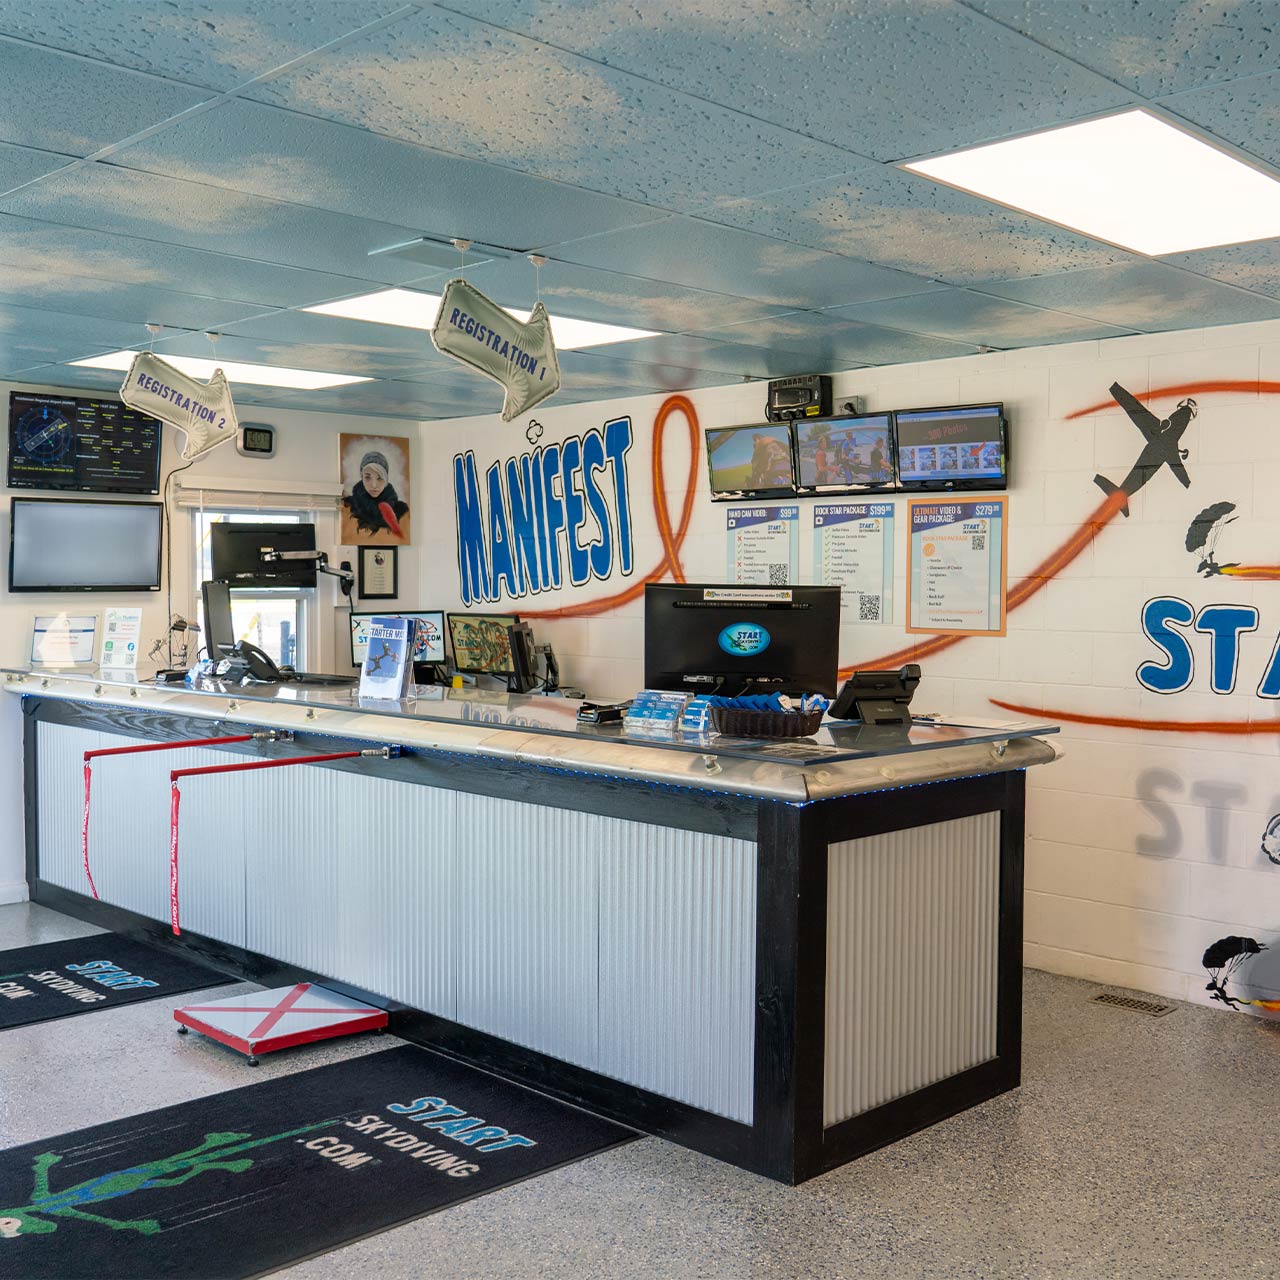 Manifest office at Start Skydiving with ceiling tiles painted to look like the sky